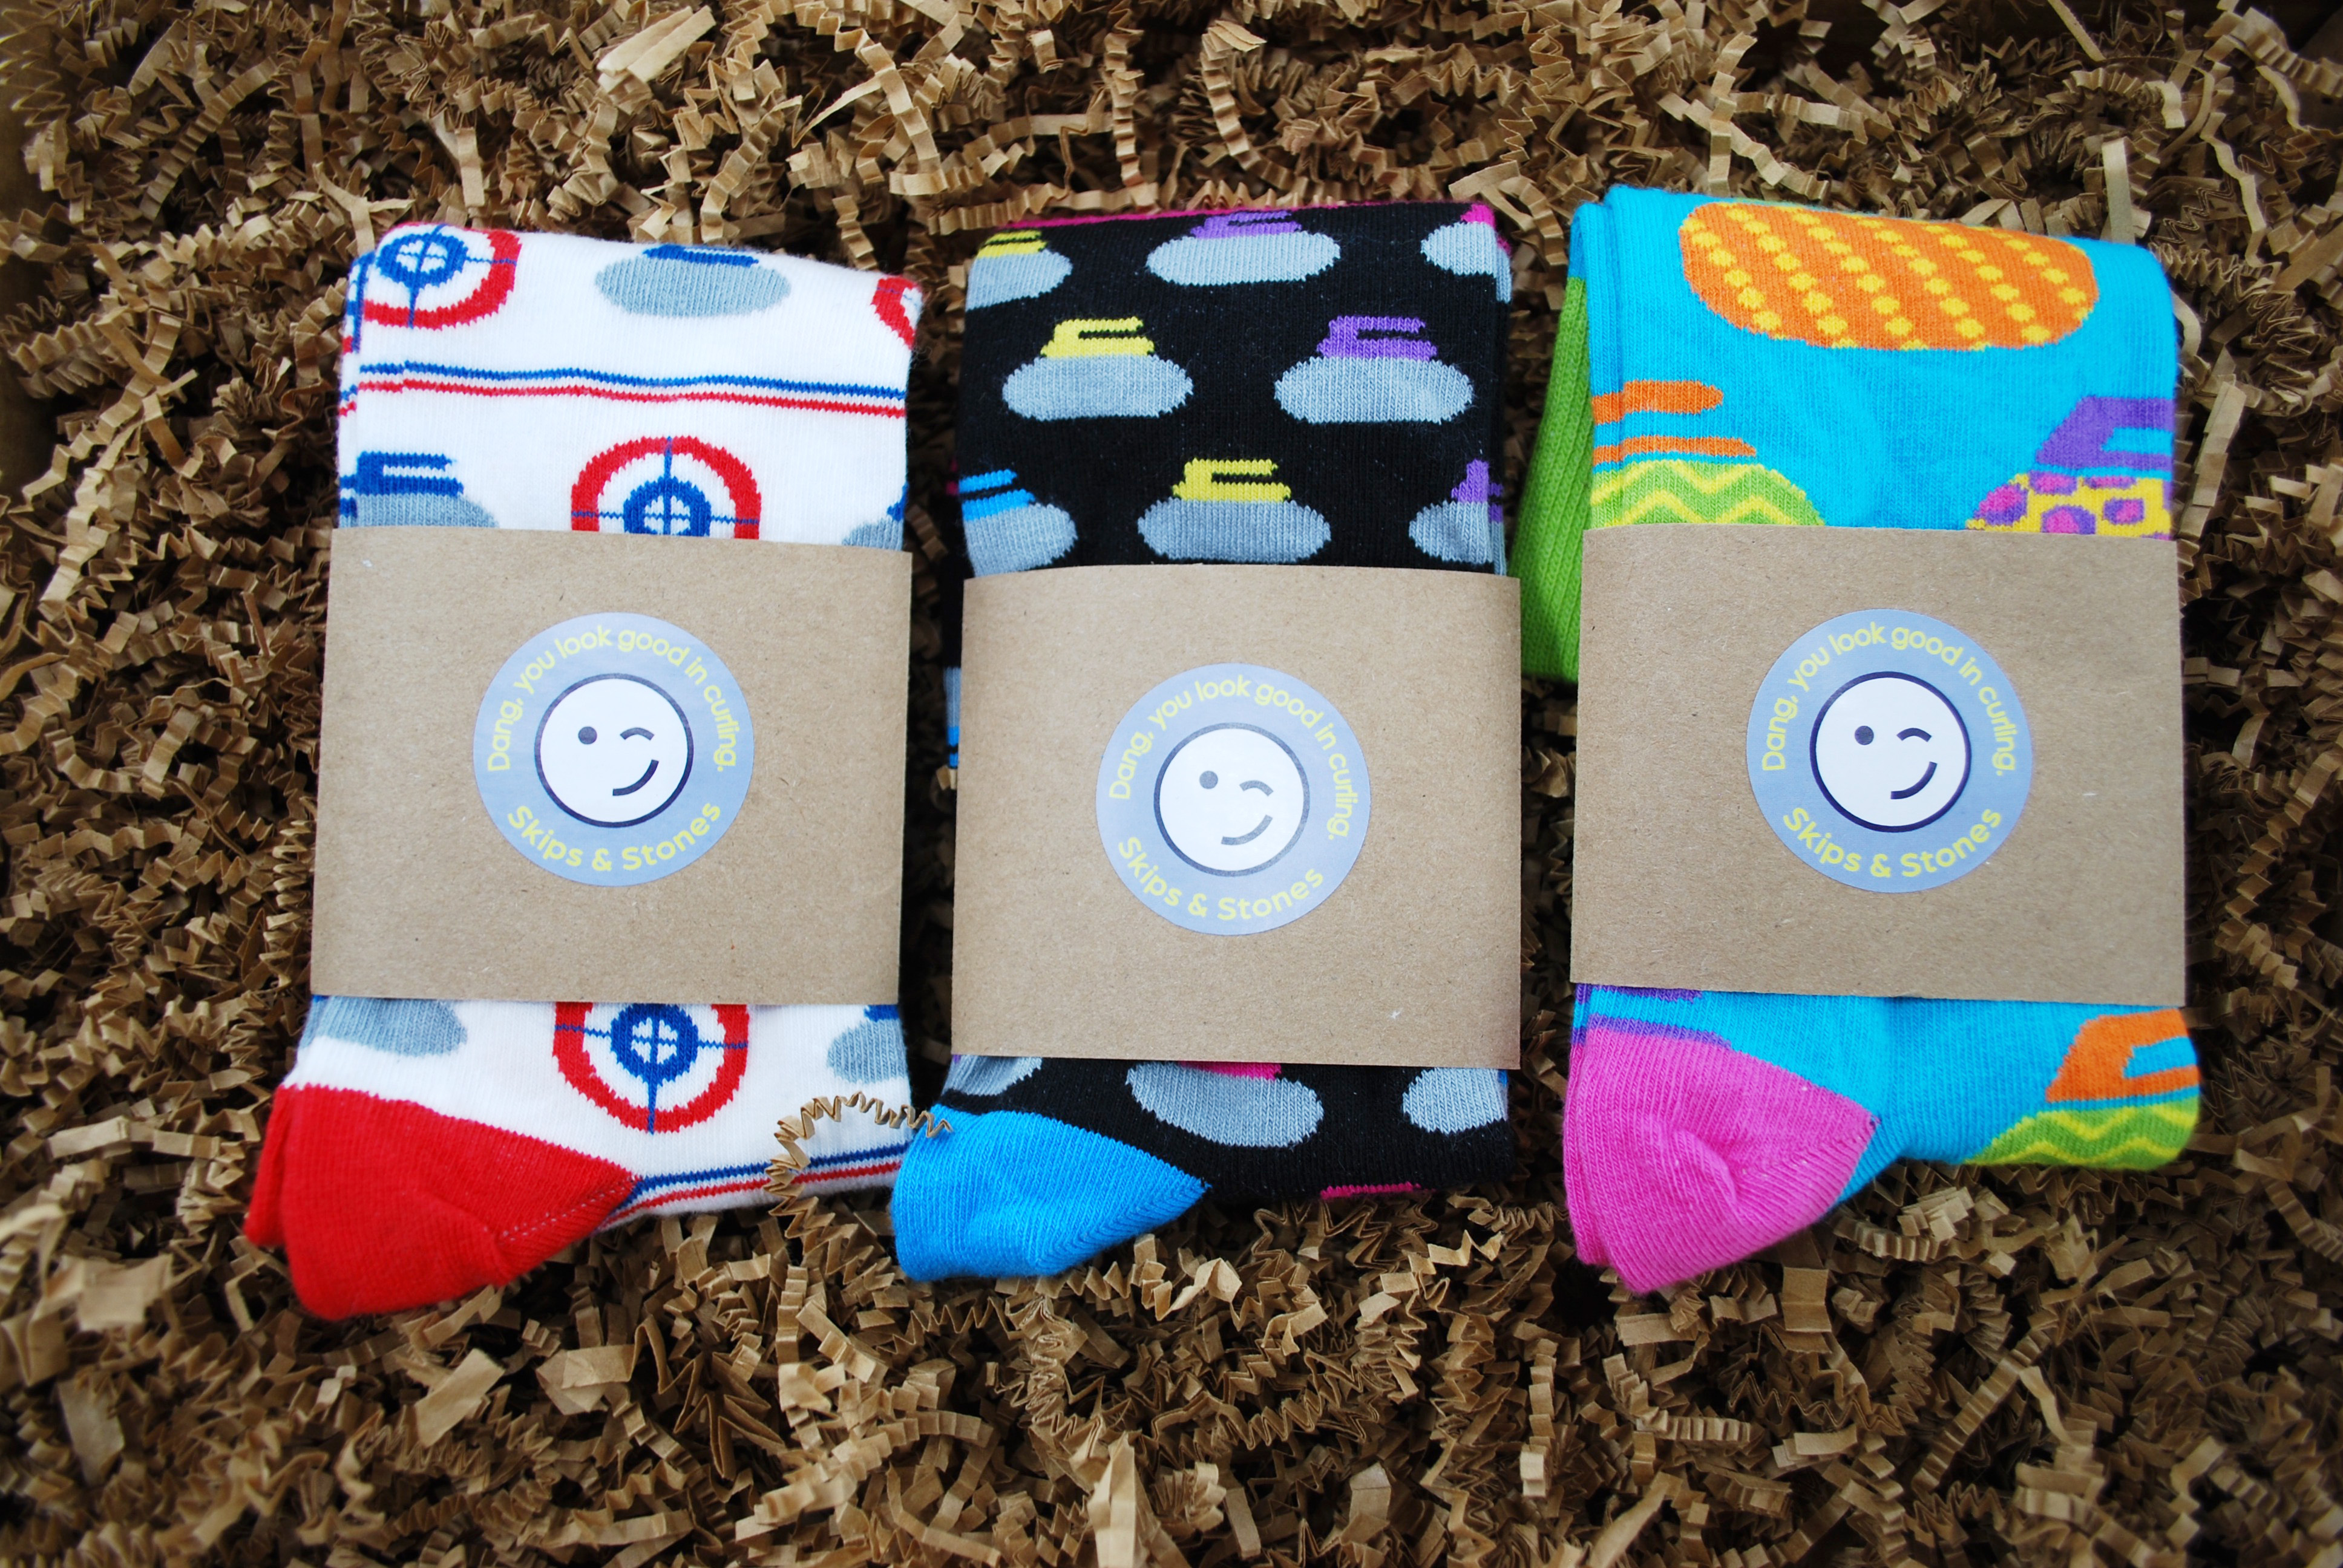 Tri-Pack of Socks with Rocks